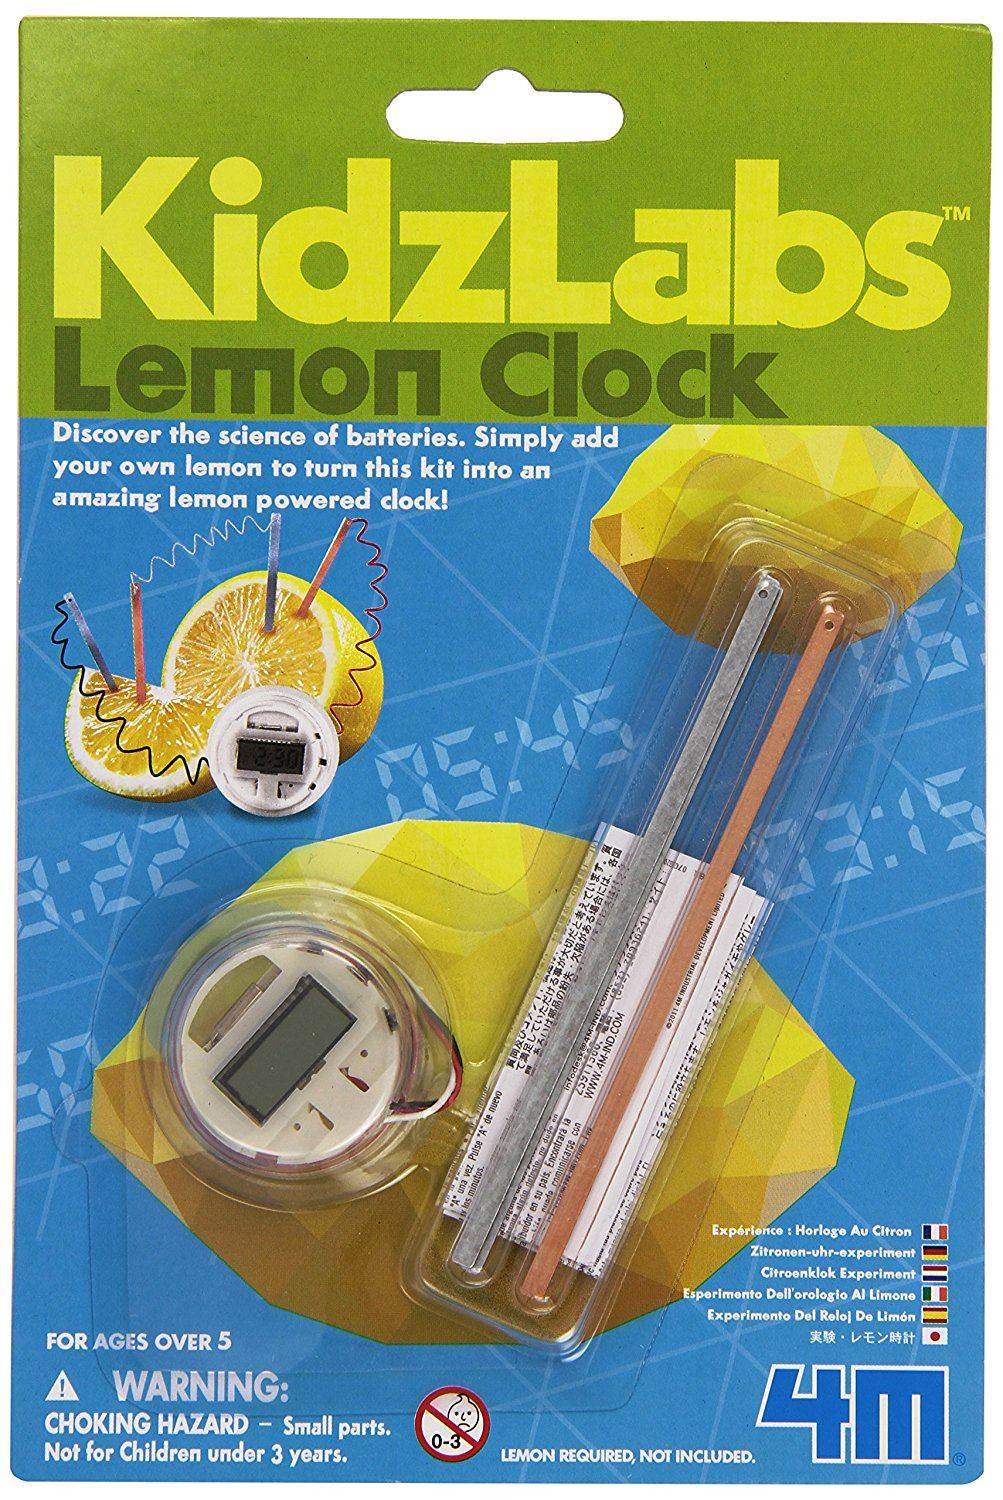 Great Gizmos 4M KidzLabs Lemon Clock - Discover the Science of Batteries